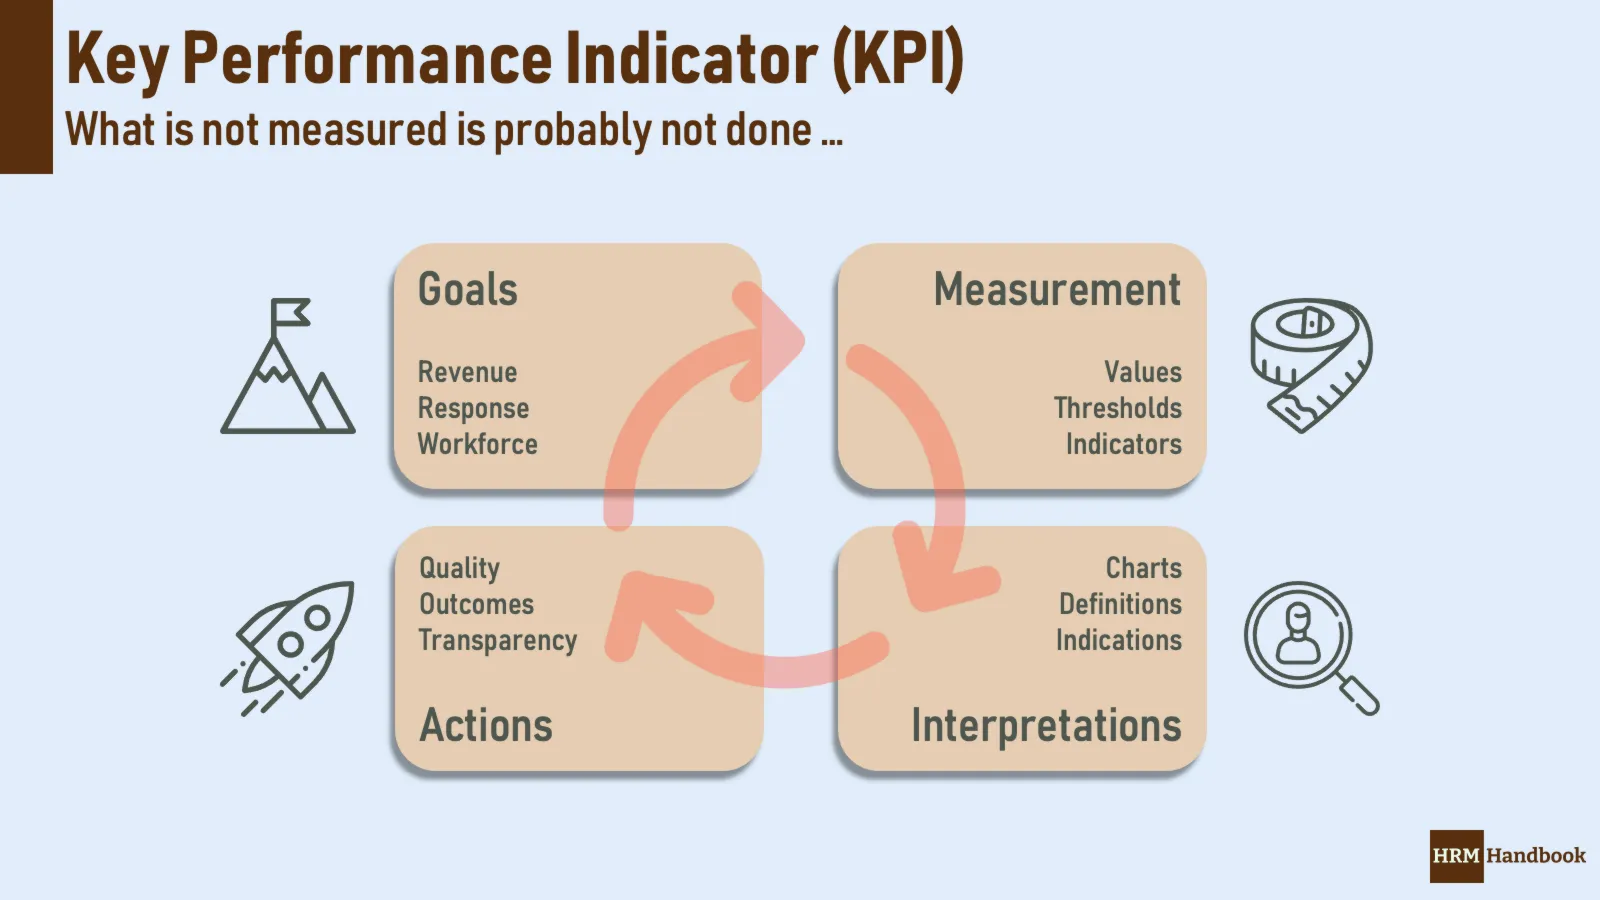 Key Performance Indicator: How does it work, Why we use it and Key Outcomes